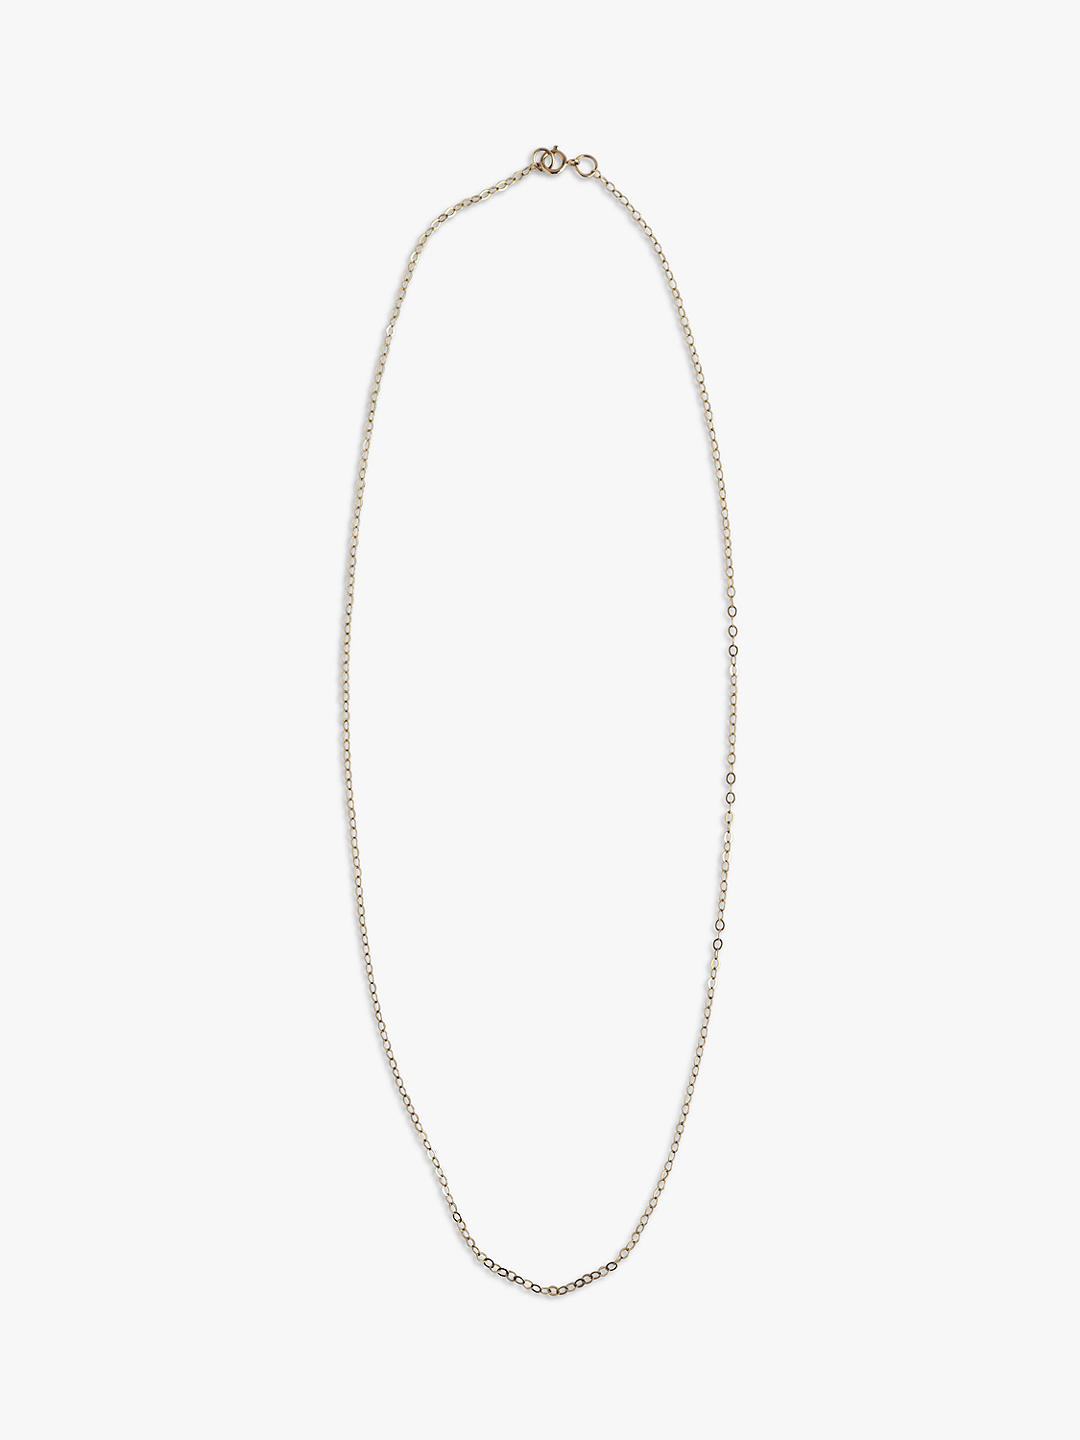 L & T Heirlooms Second Hand 9ct Yellow Gold Trace Chain Necklace, Dated Circa 1997, Gold